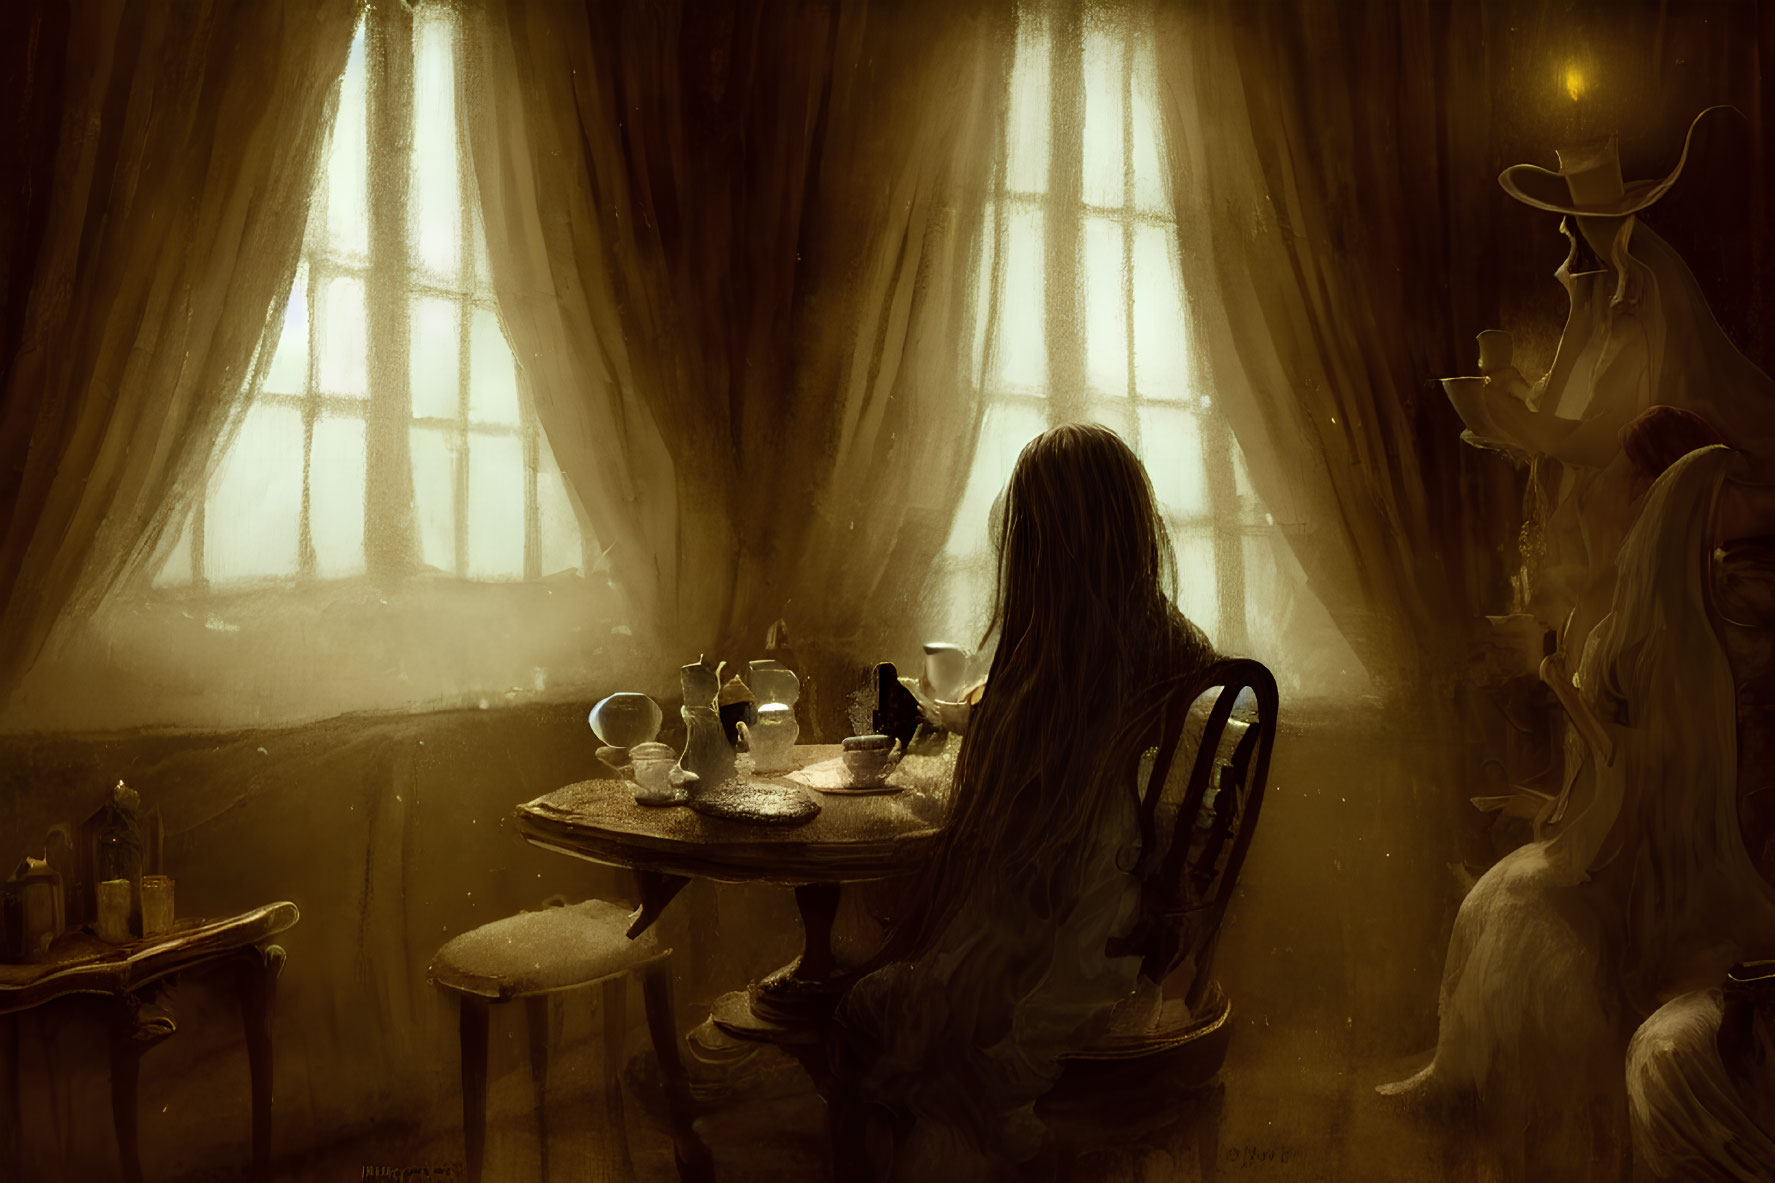 Dimly-lit room with heavy drapes, person at table with ghostly figure - mysterious ambiance